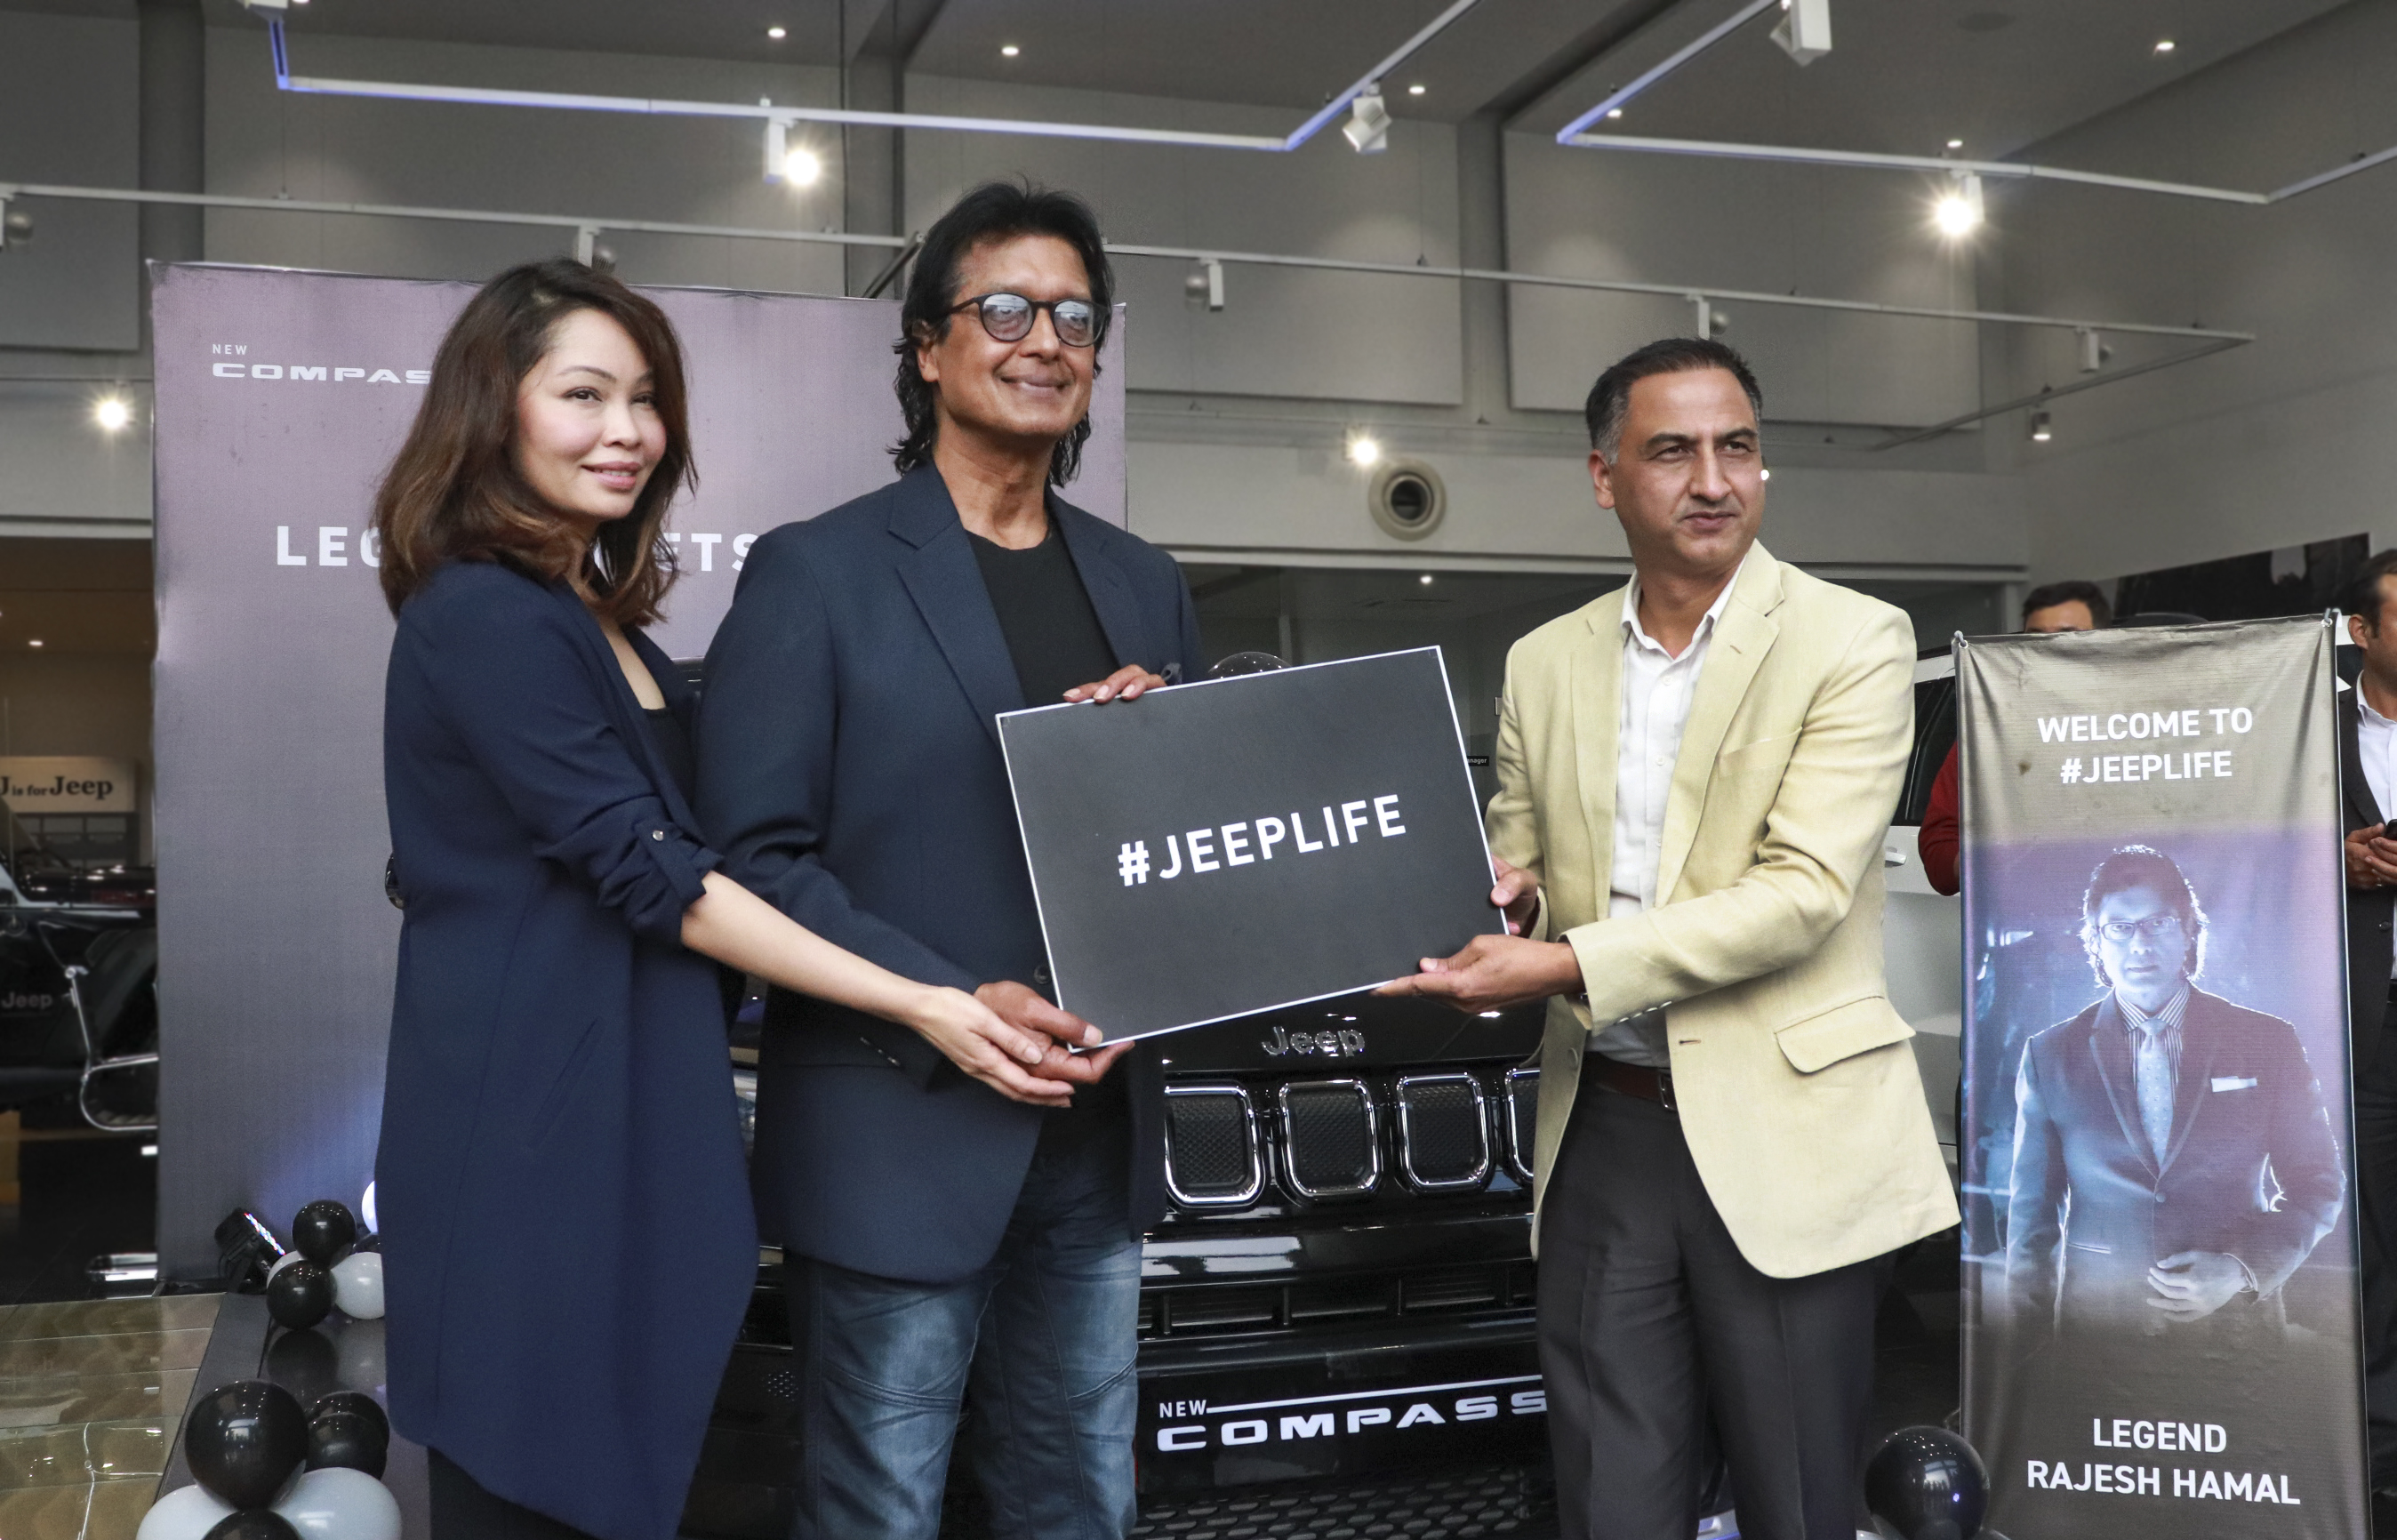 Rajesh Hamal enters into Jeep Life with New Jeep Compass